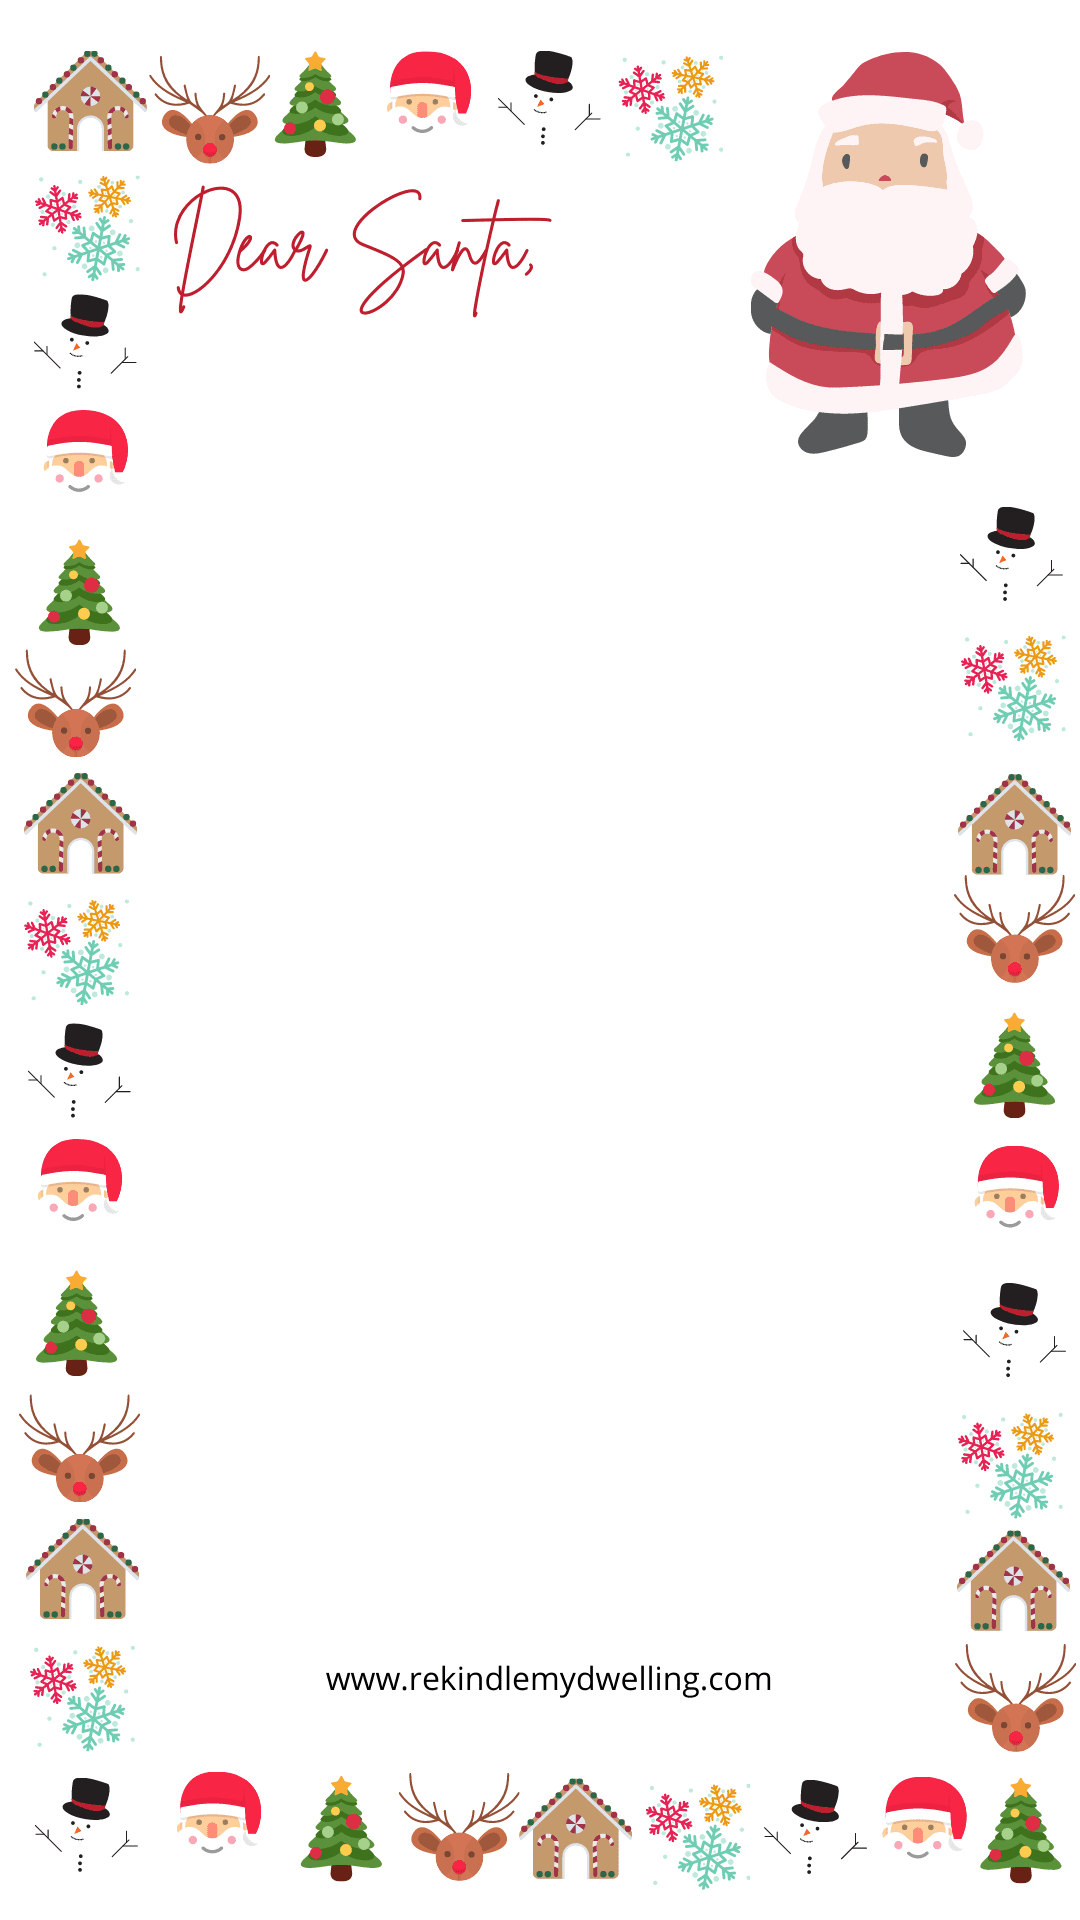 Santa letter template with Christmas images around the border.